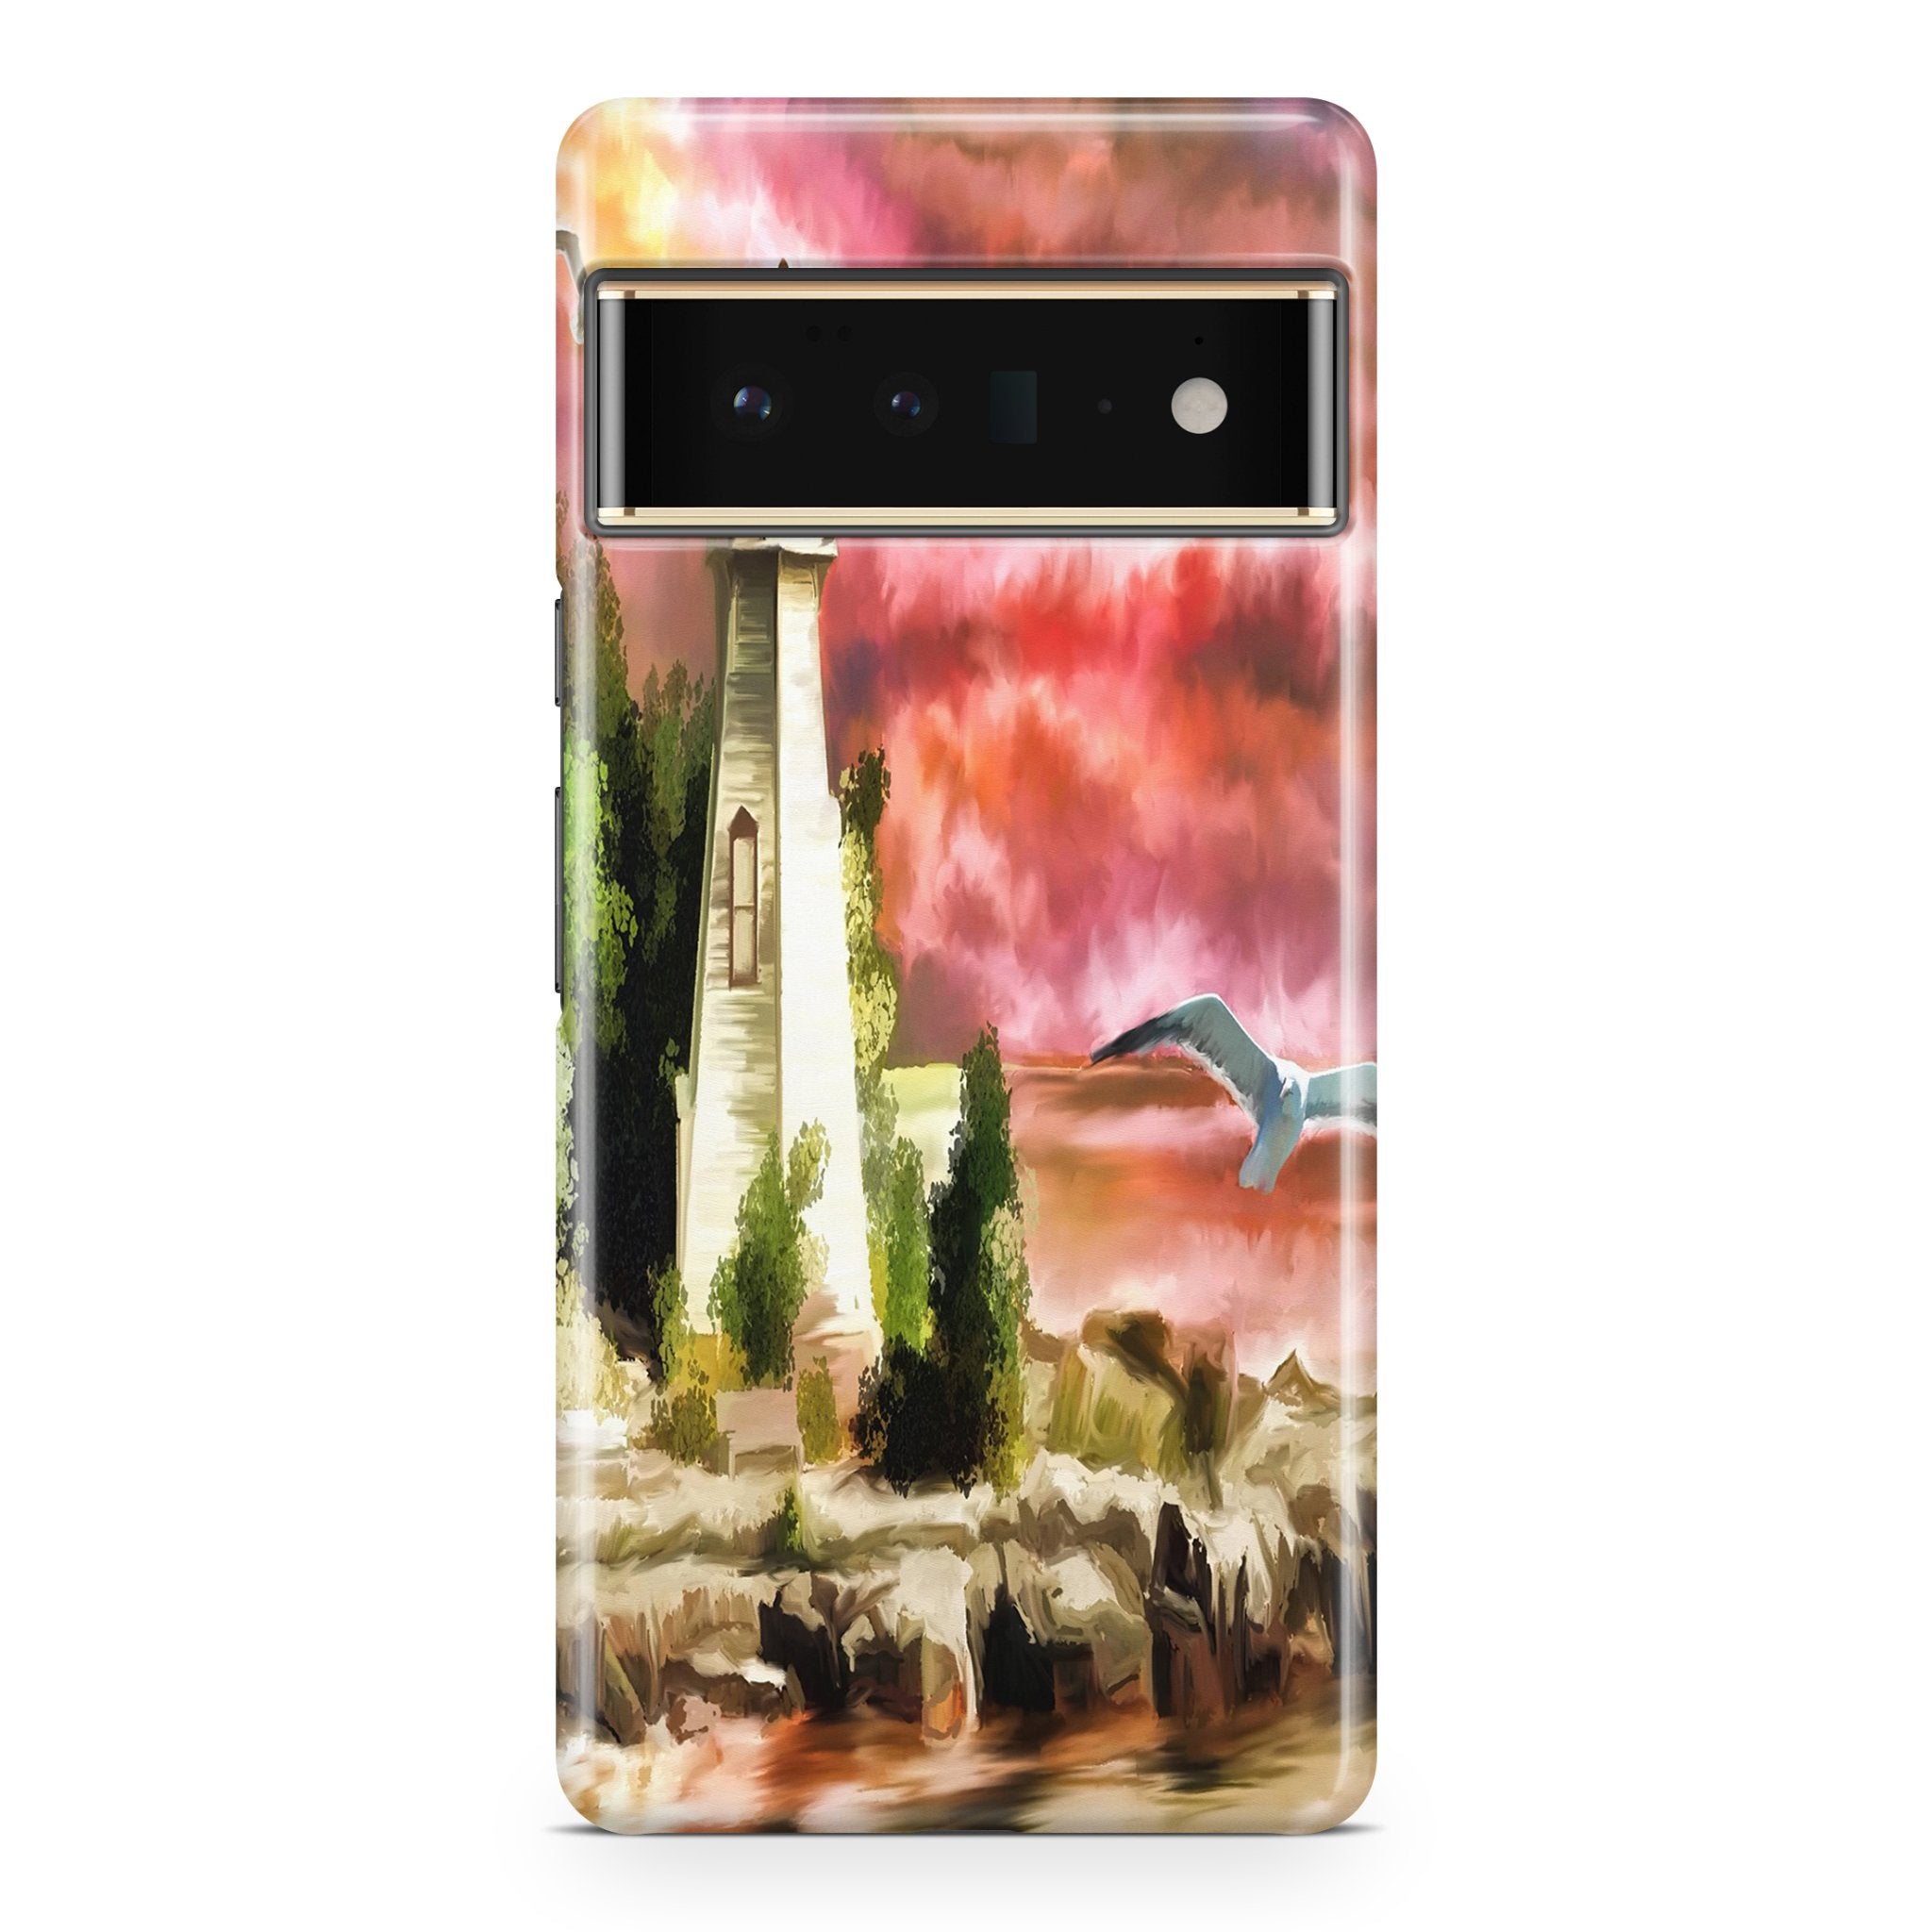 Lighthouse - Google phone case designs by CaseSwagger